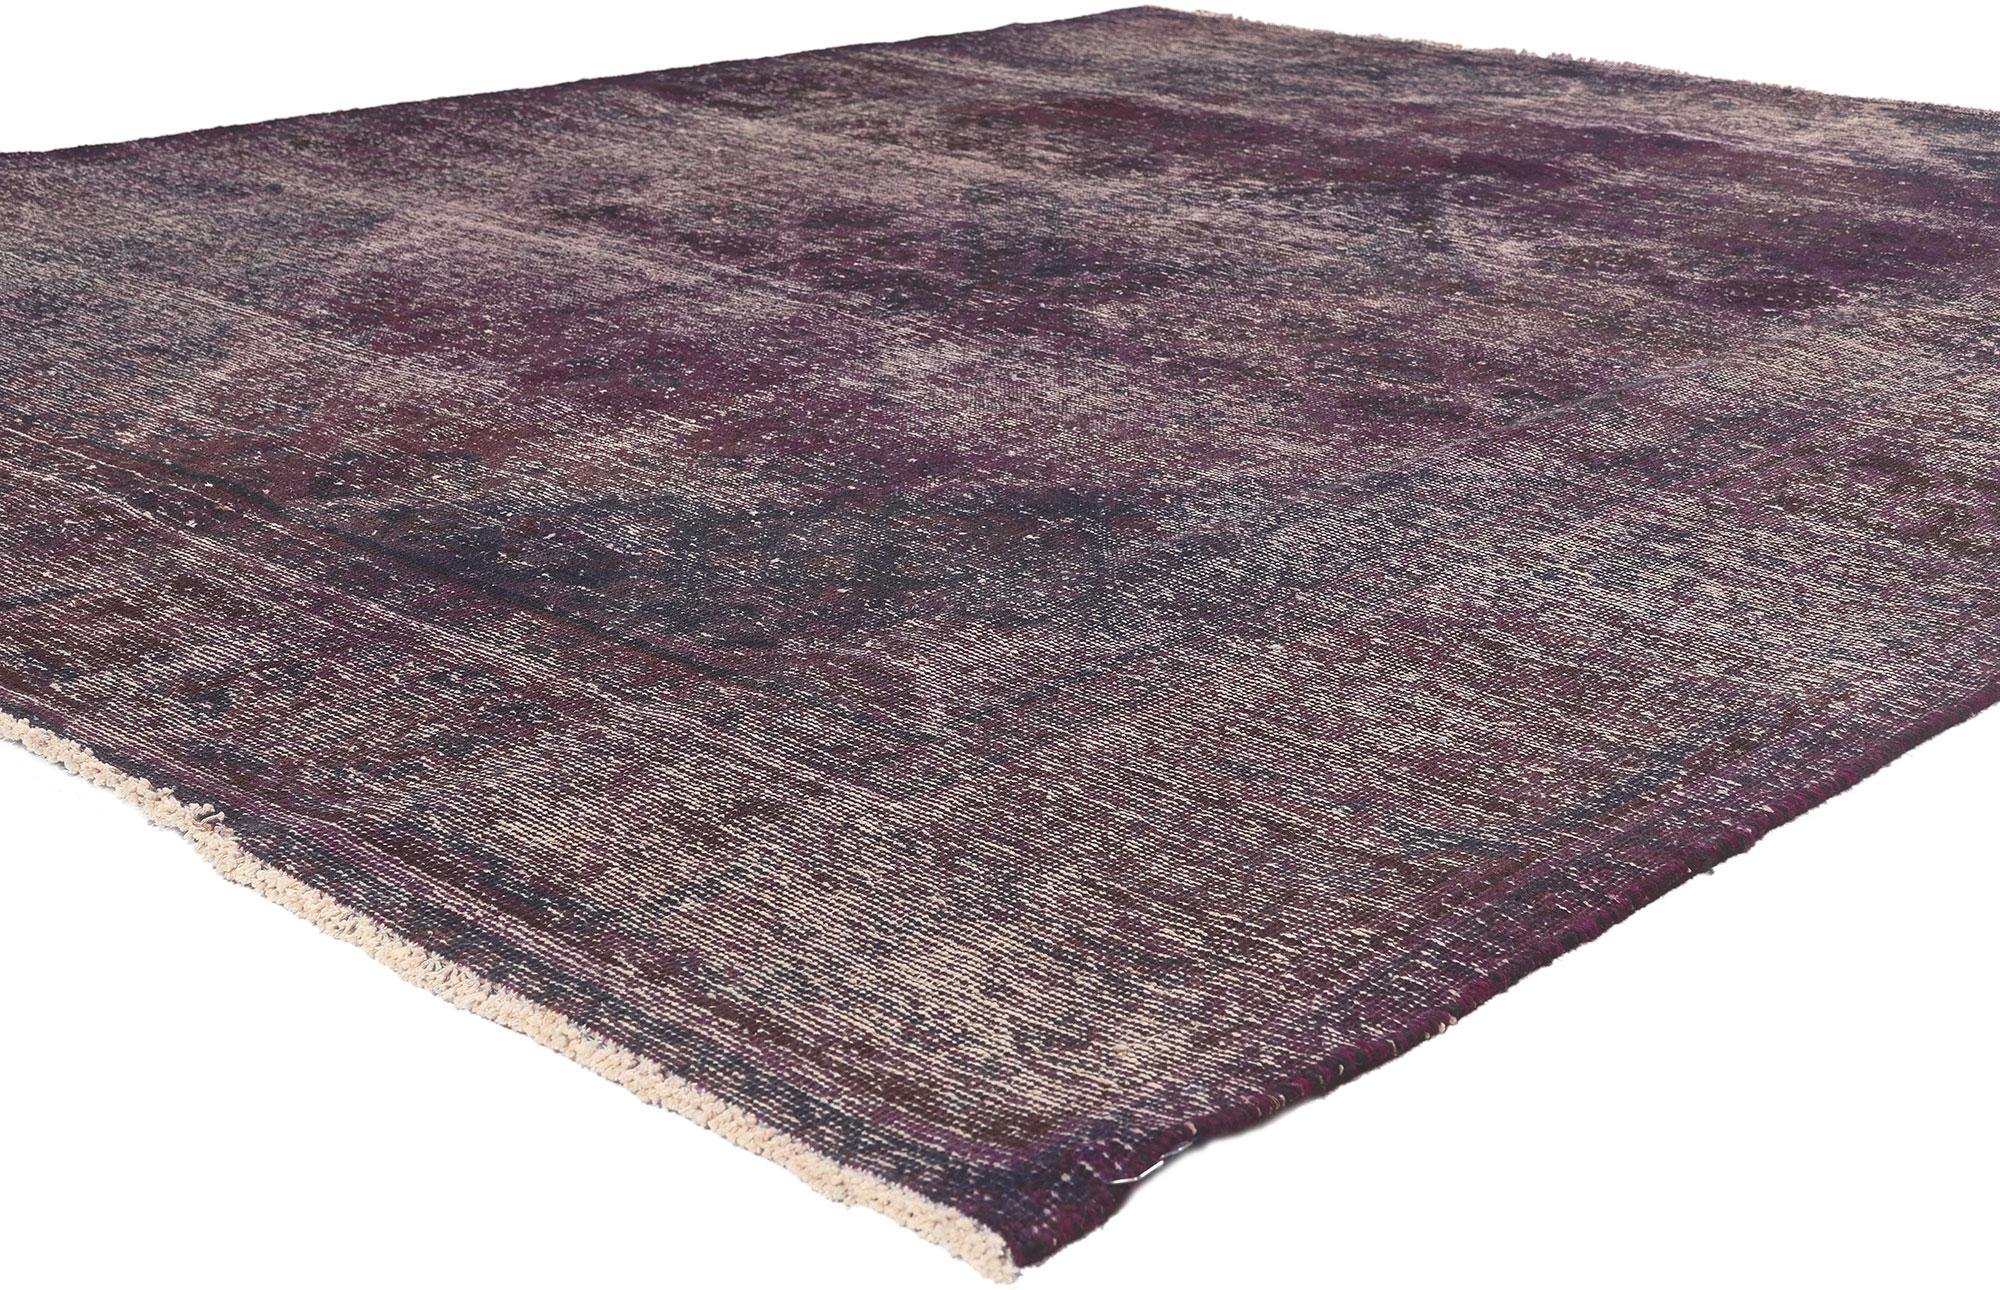 60685 Vintage Turkish Overdyed Rug, 07'02 x 08'09. 
In a graceful convergence of modern industrial aesthetics and regal Regency vibes, behold this hand-knotted wool distressed vintage Turkish overdyed area rug. At its core, a central lozenge